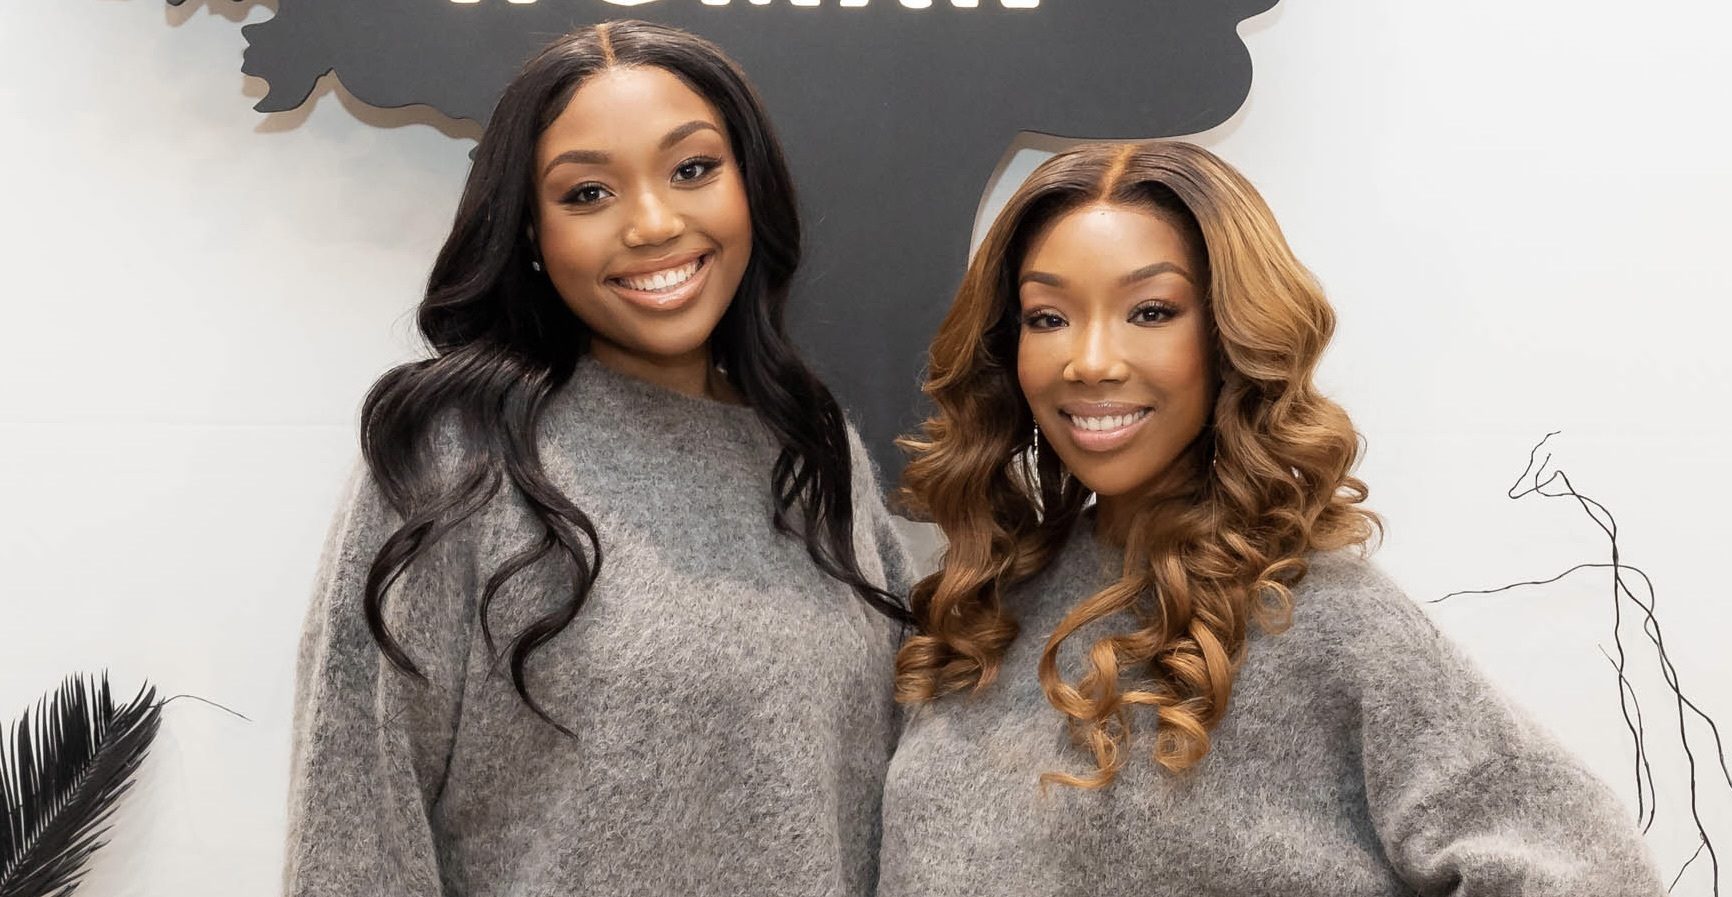 Runs In The Family! Brandy's Daughter, Sy'Rai Smith, Serenades Fans By Covering Her Mother's Hits